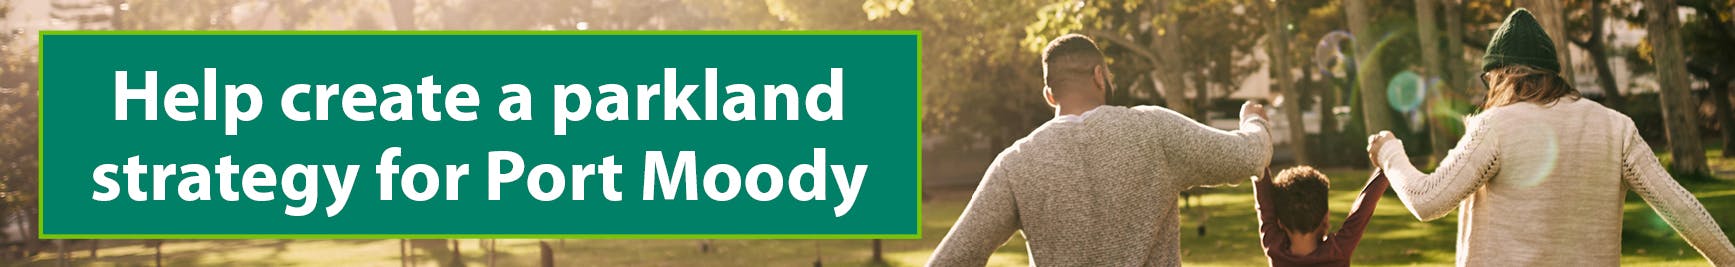 help create a parkland strategy for Port Moody